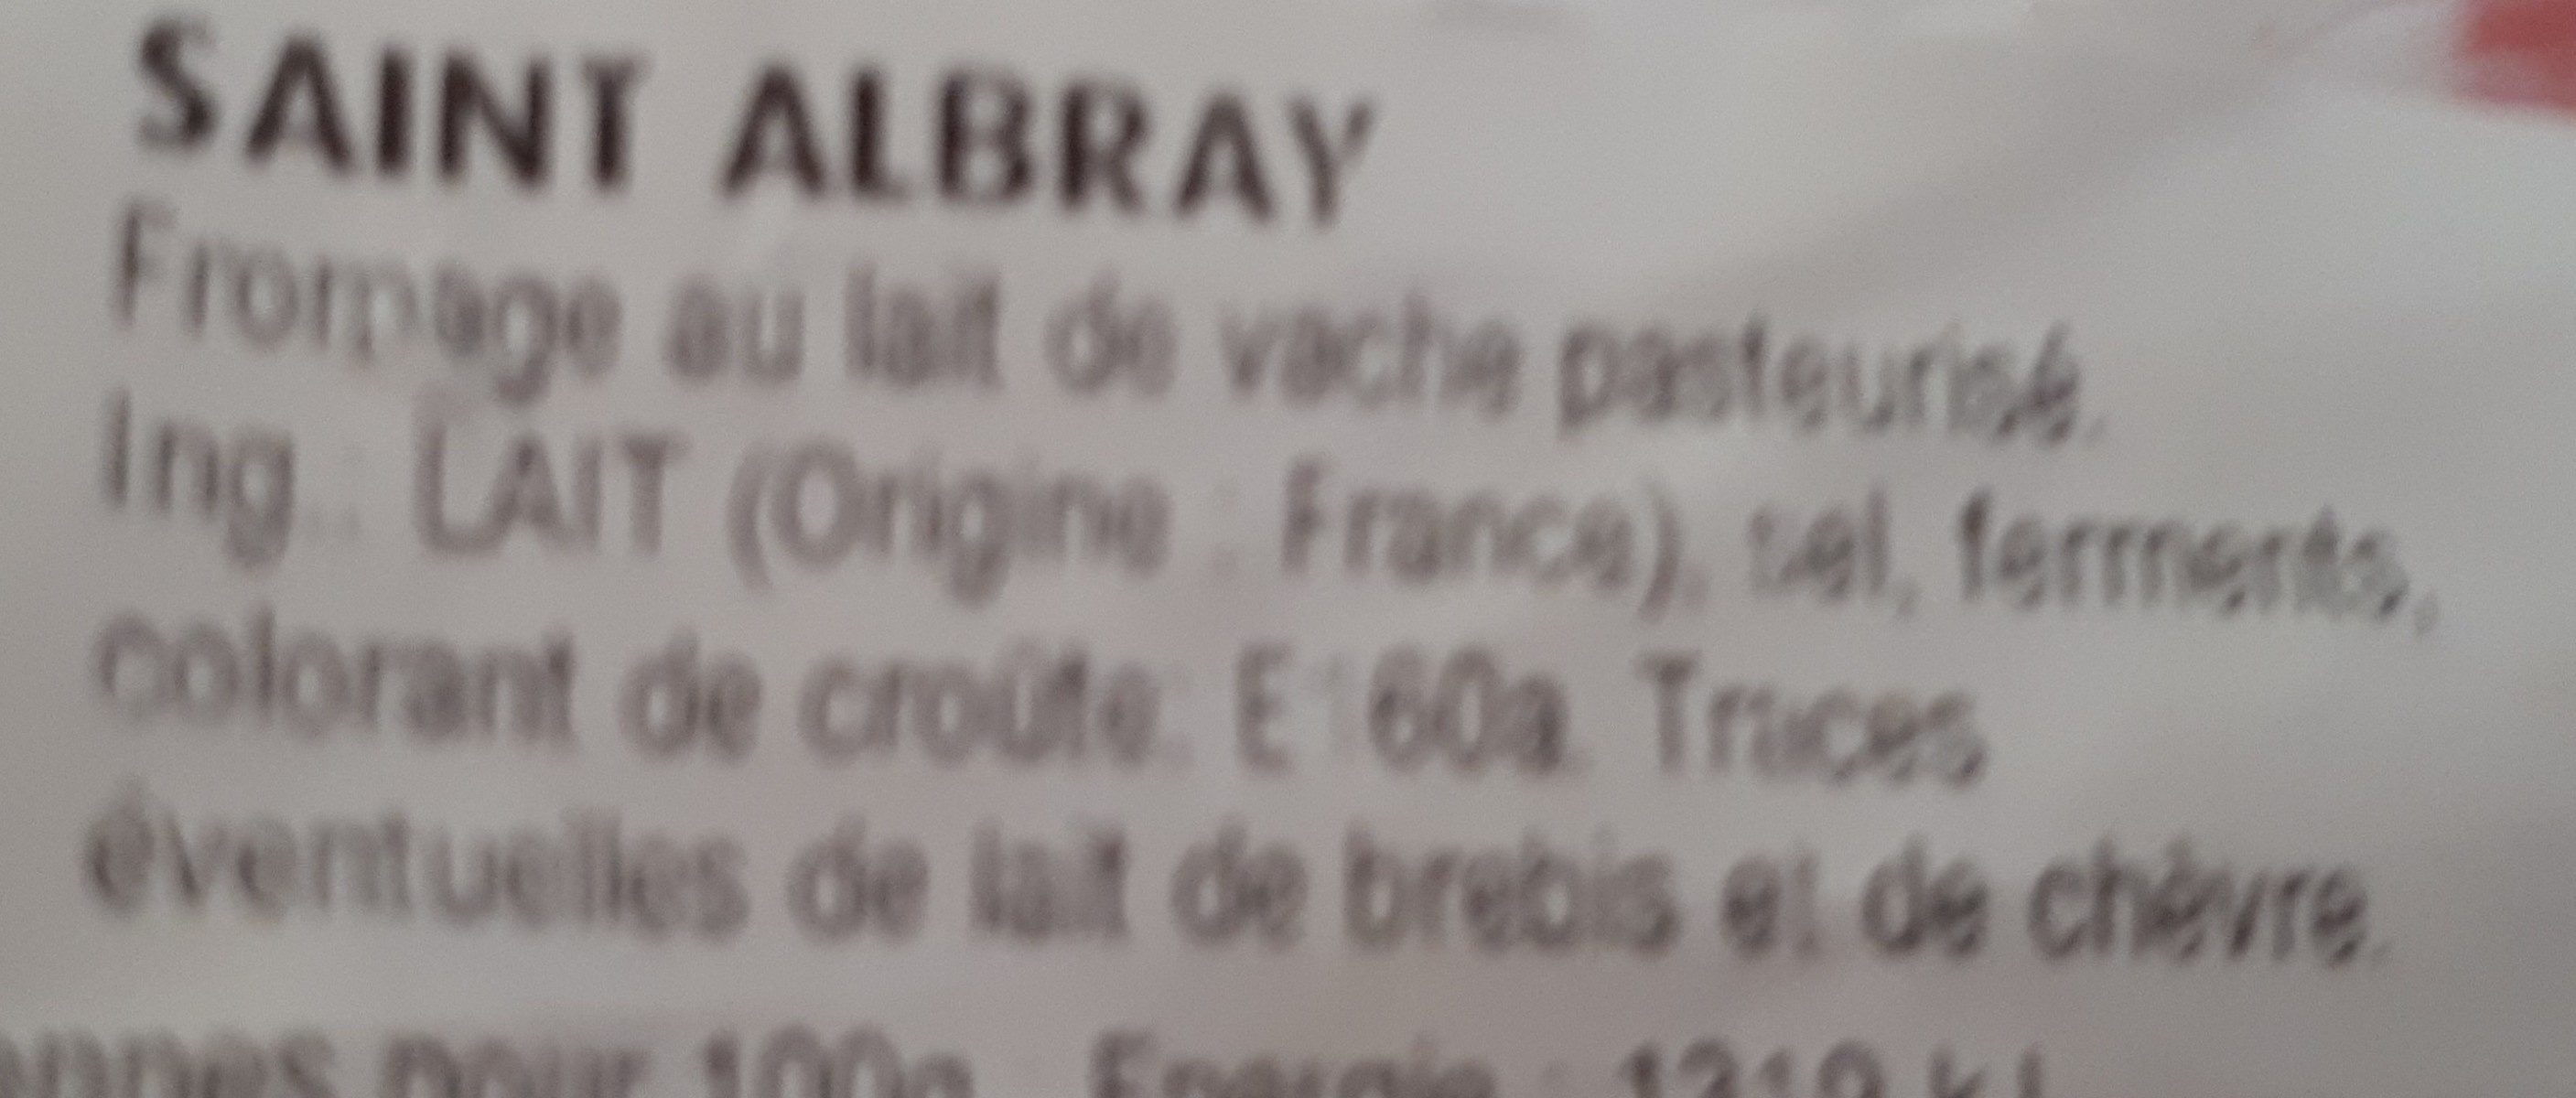 Fromage St Albray - Ingrédients